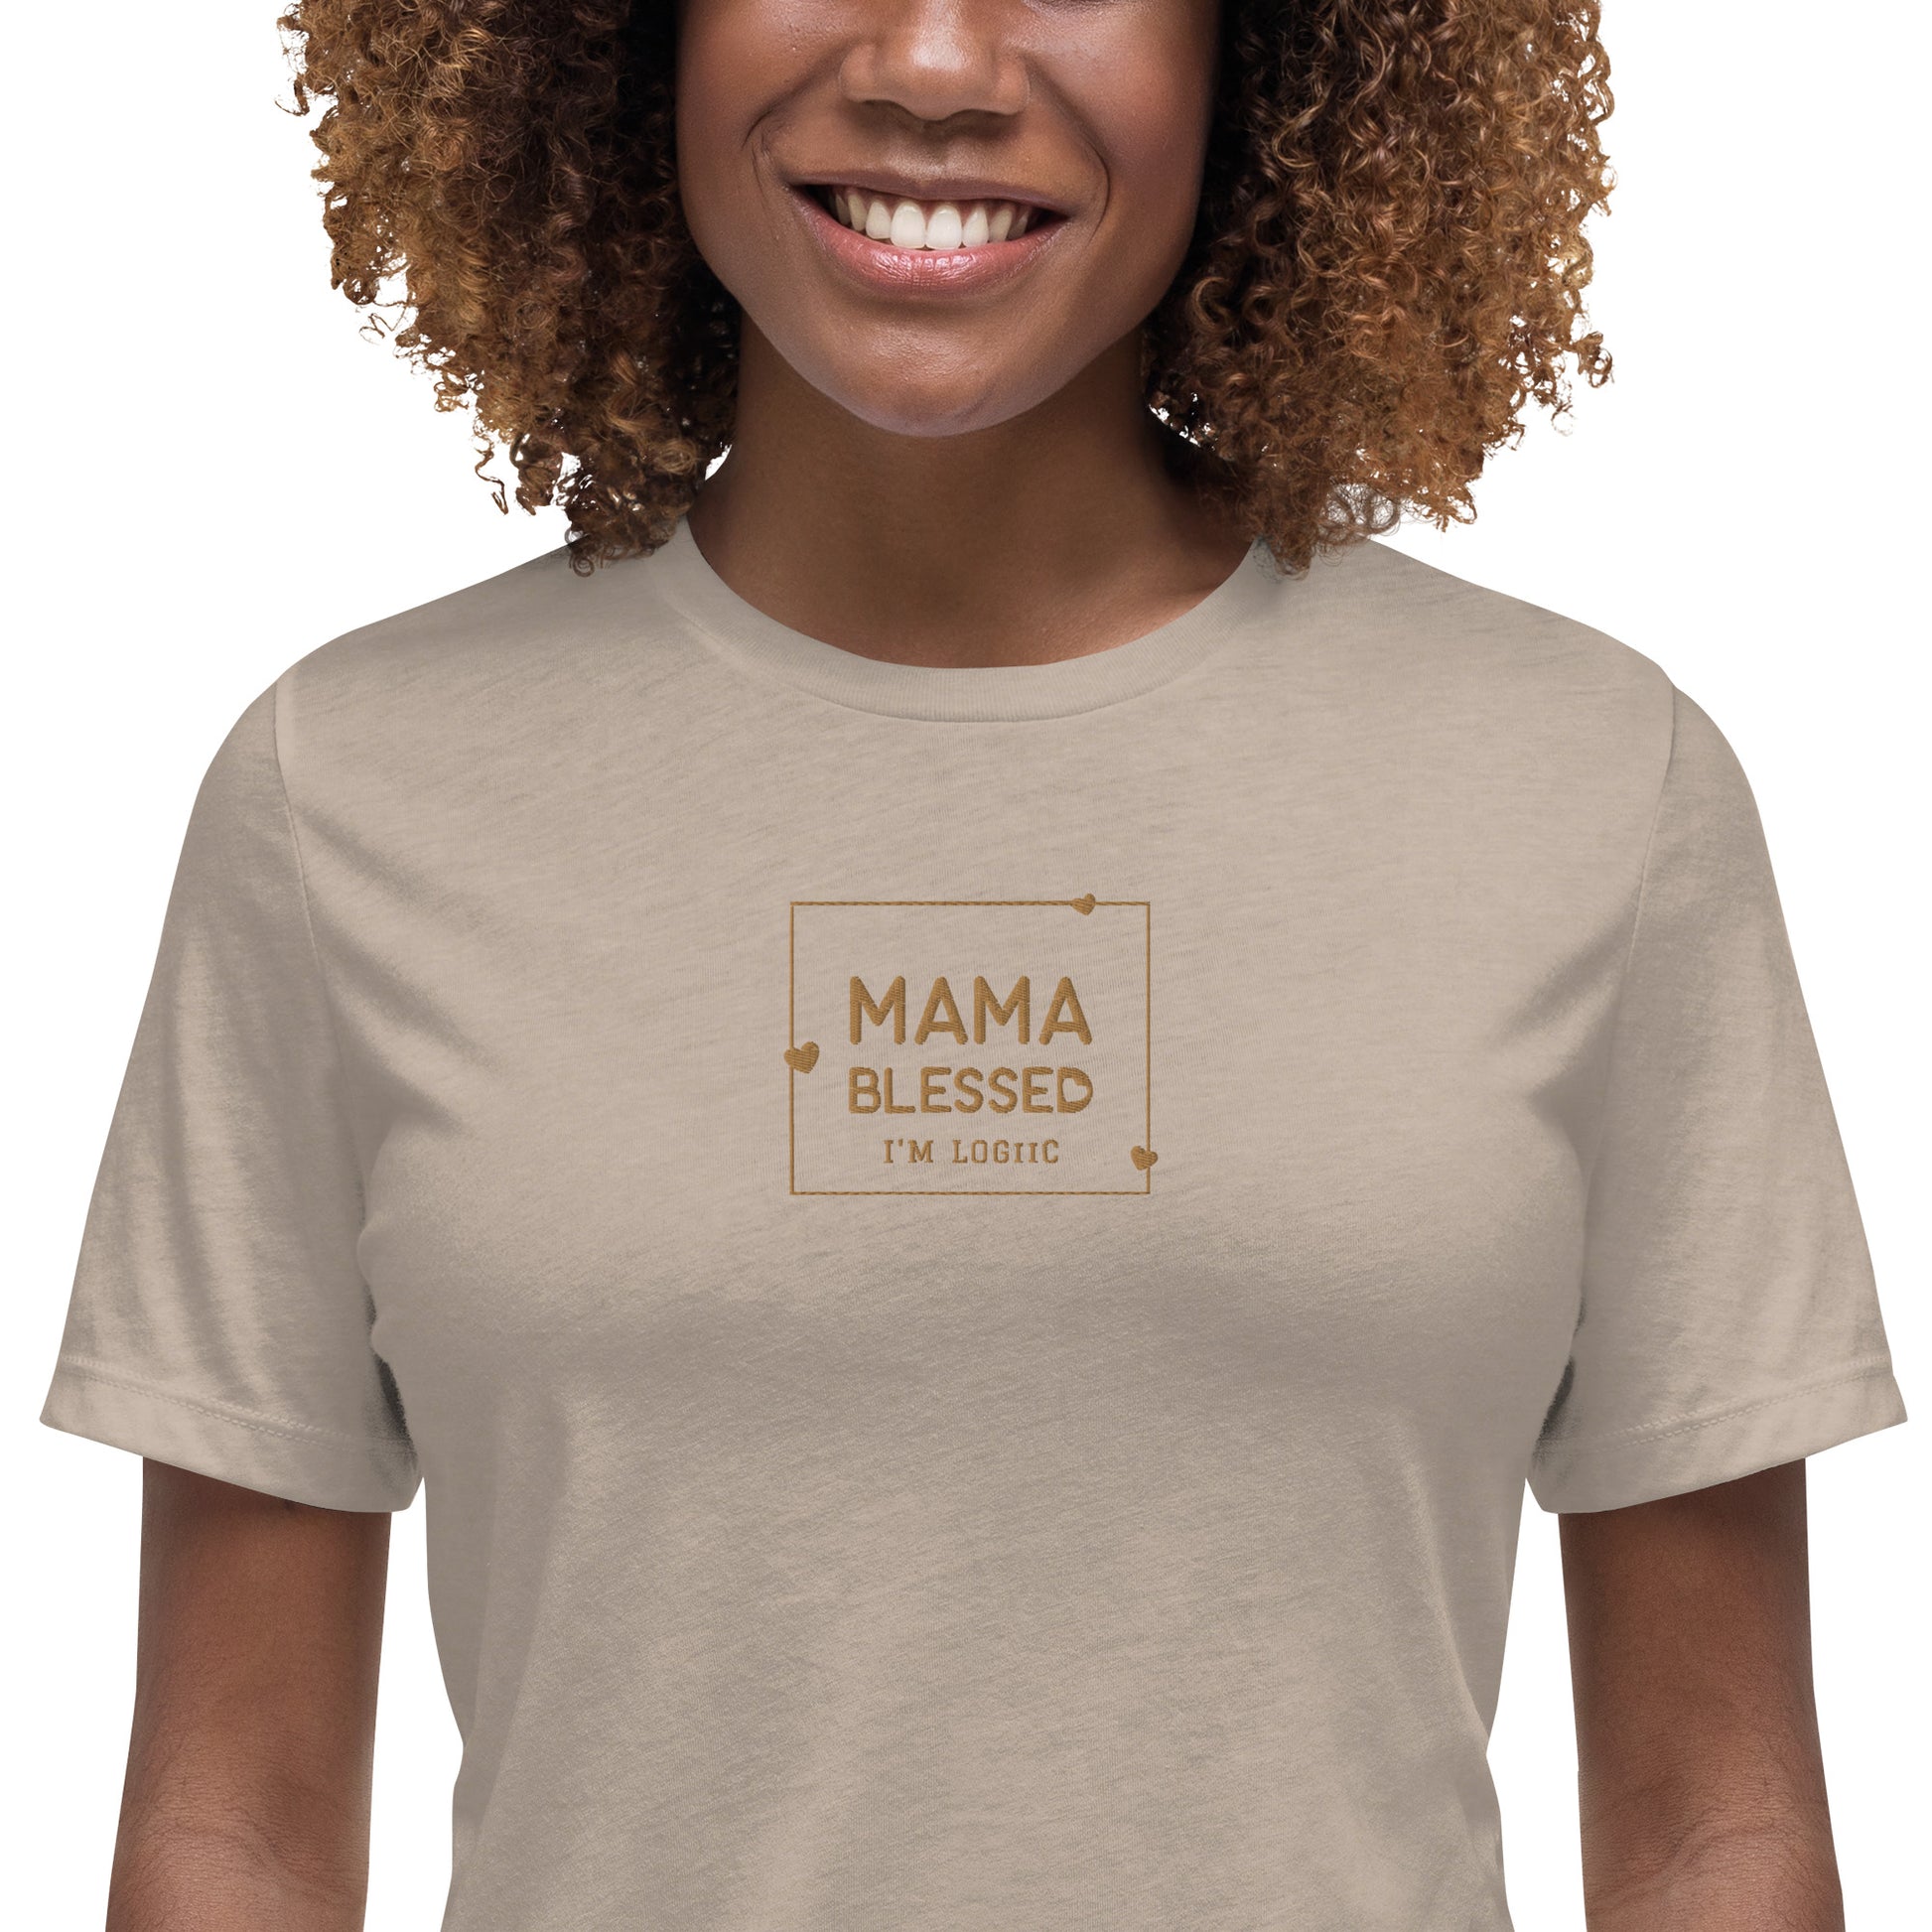 Mama Blessed Women’s Relaxed T-Shirt - Shirts & Tops